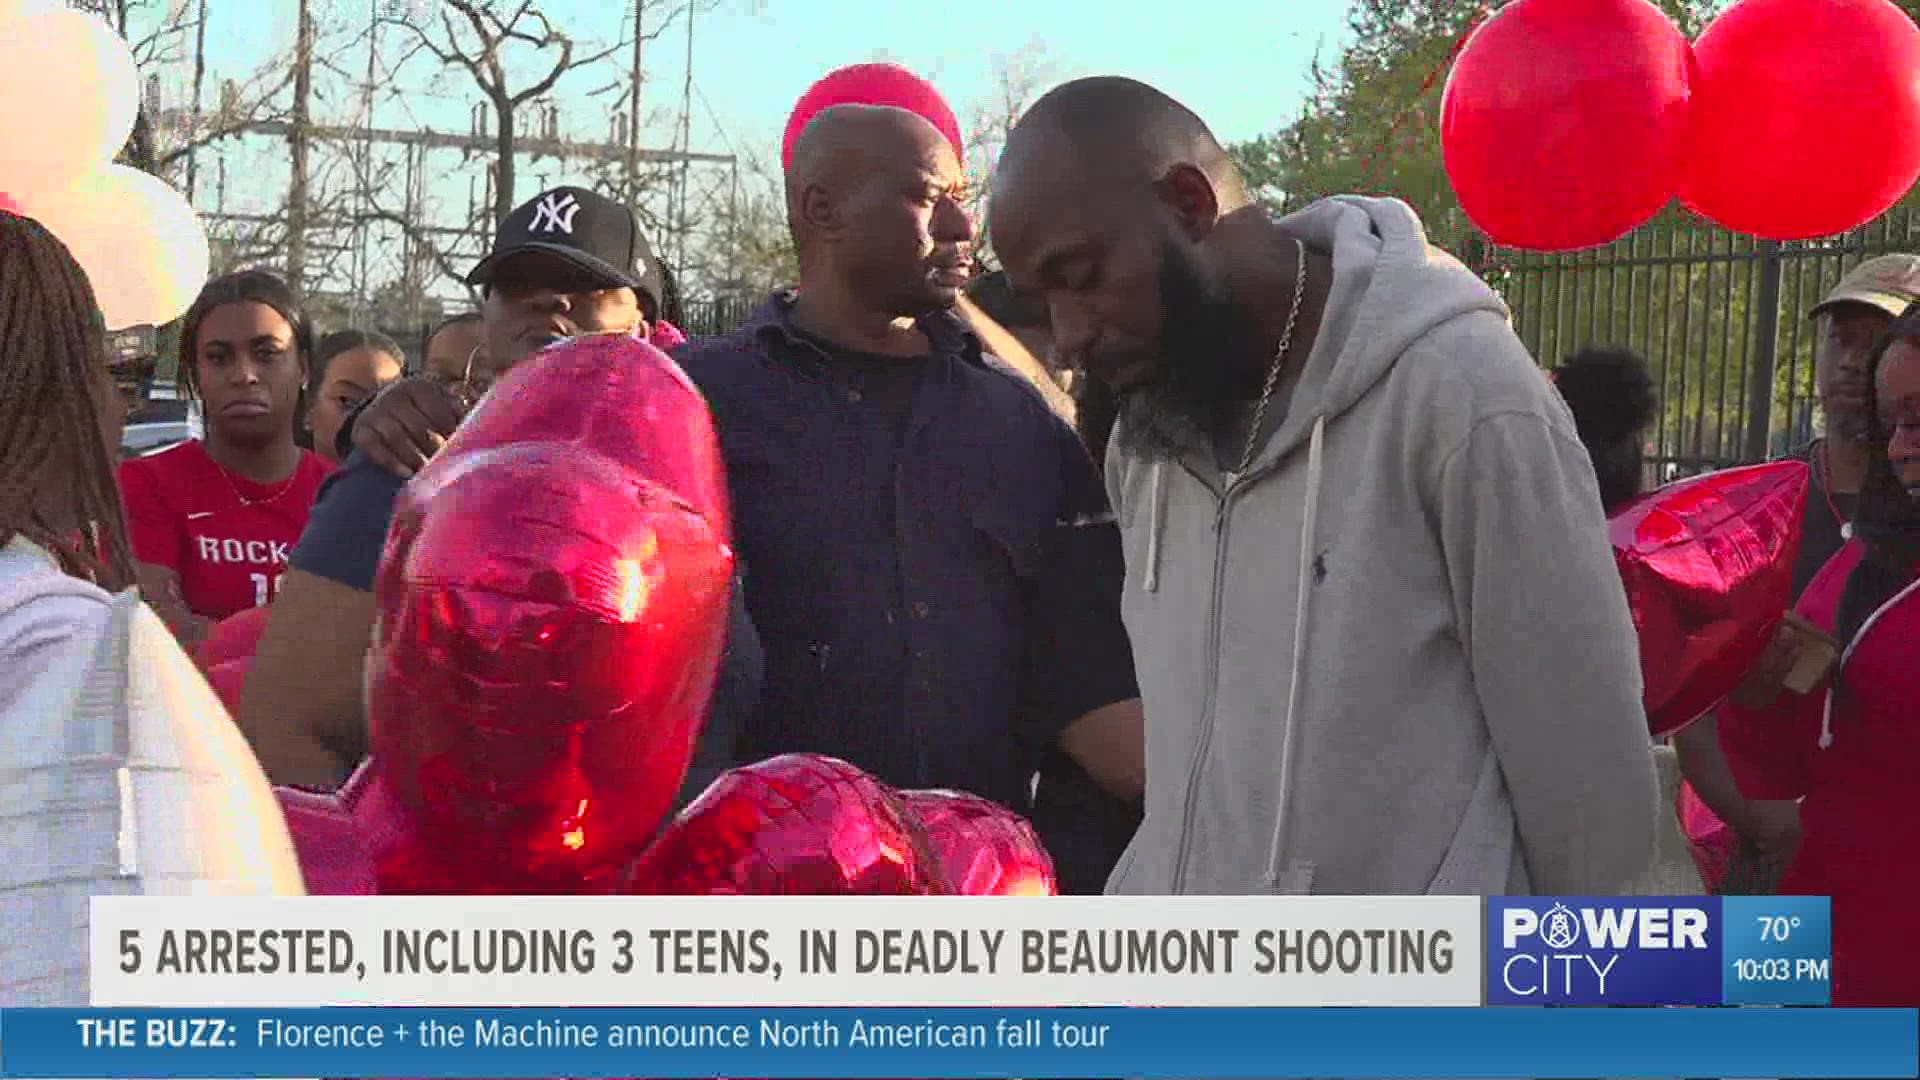 A family in Beaumont is shocked, angered and heartbroken after a Sunday evening shooting claimed the life of a 31-year-old man.